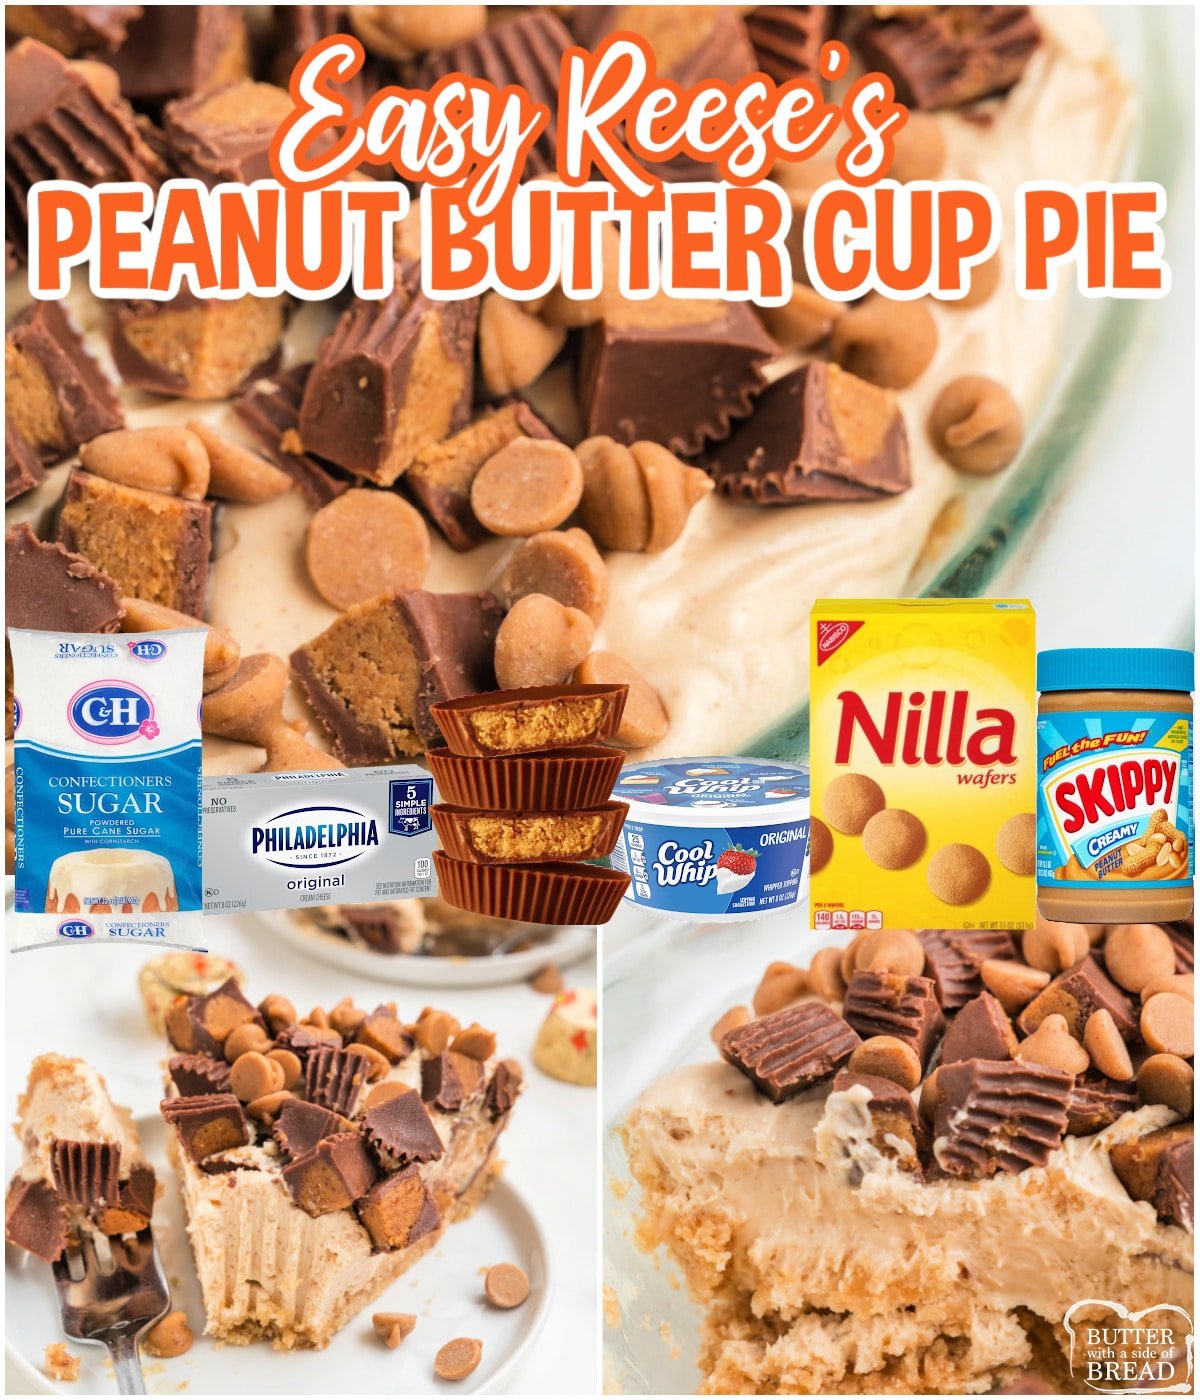 Reese's Peanut Butter Cup Pie is made with a simple vanilla wafer crust and a creamy peanut butter filling. This simple pie recipe is packed with Reese's Peanut Butter cups!